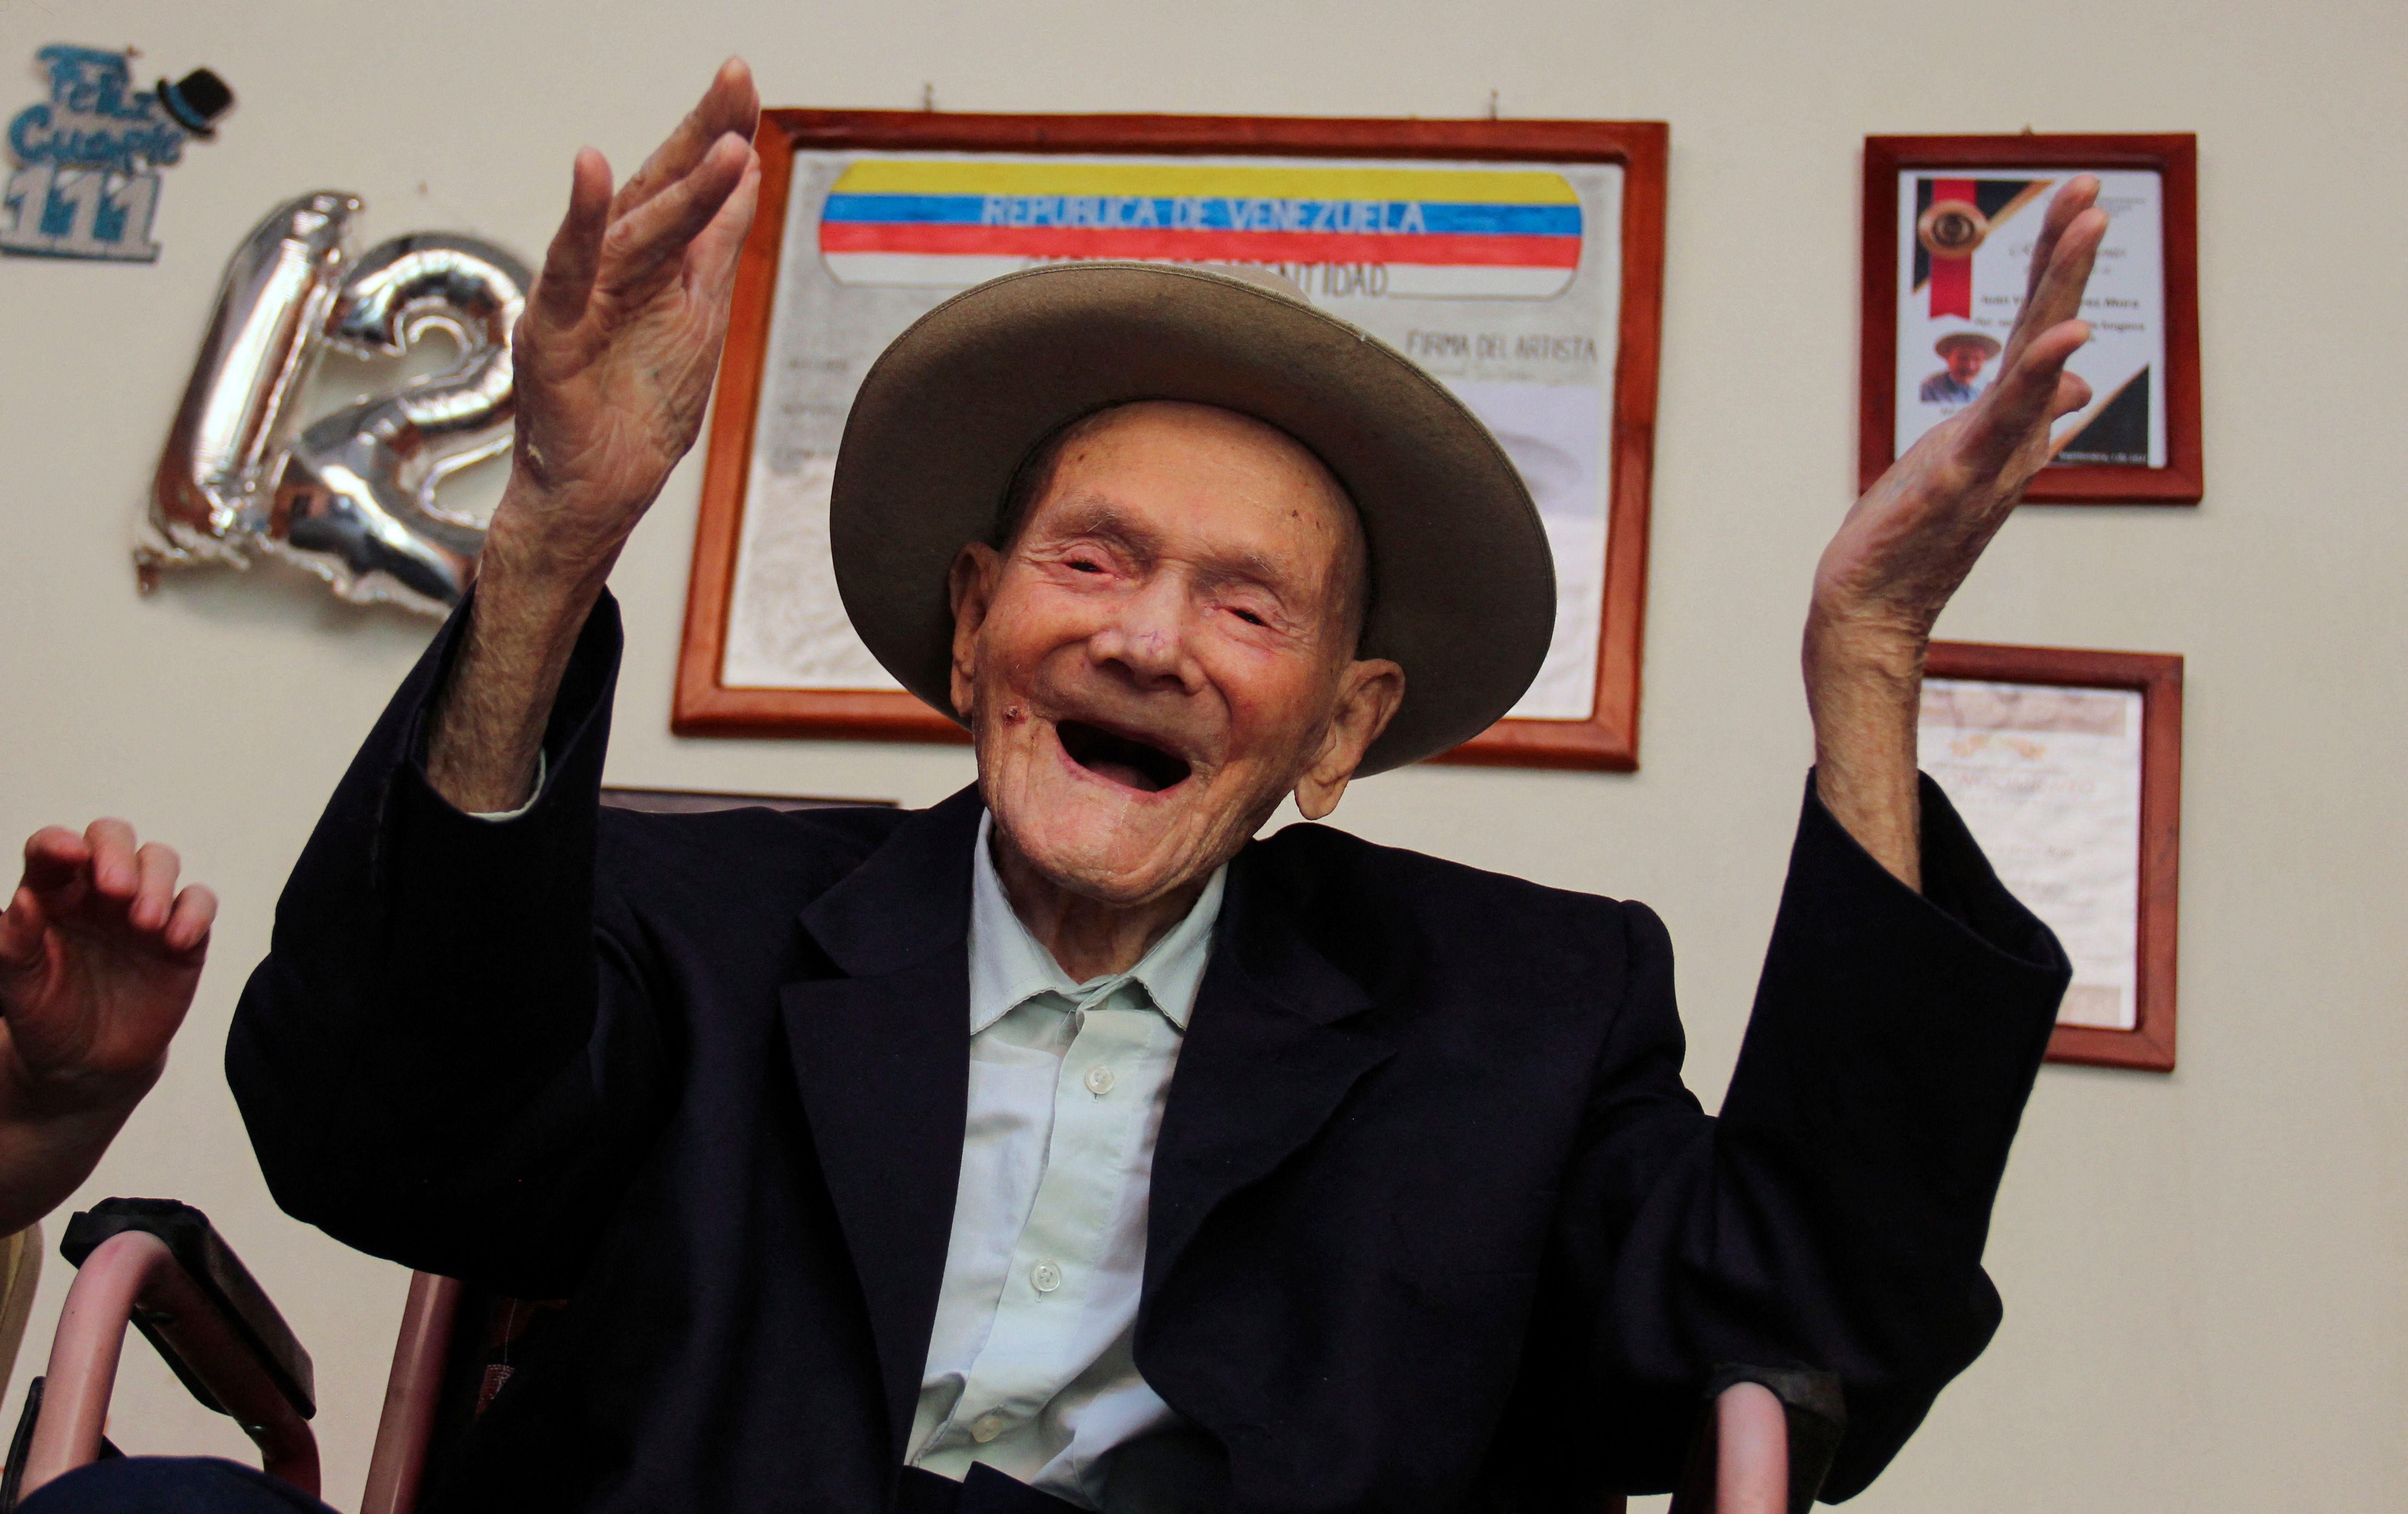 World’s oldest man dies at the age of 114